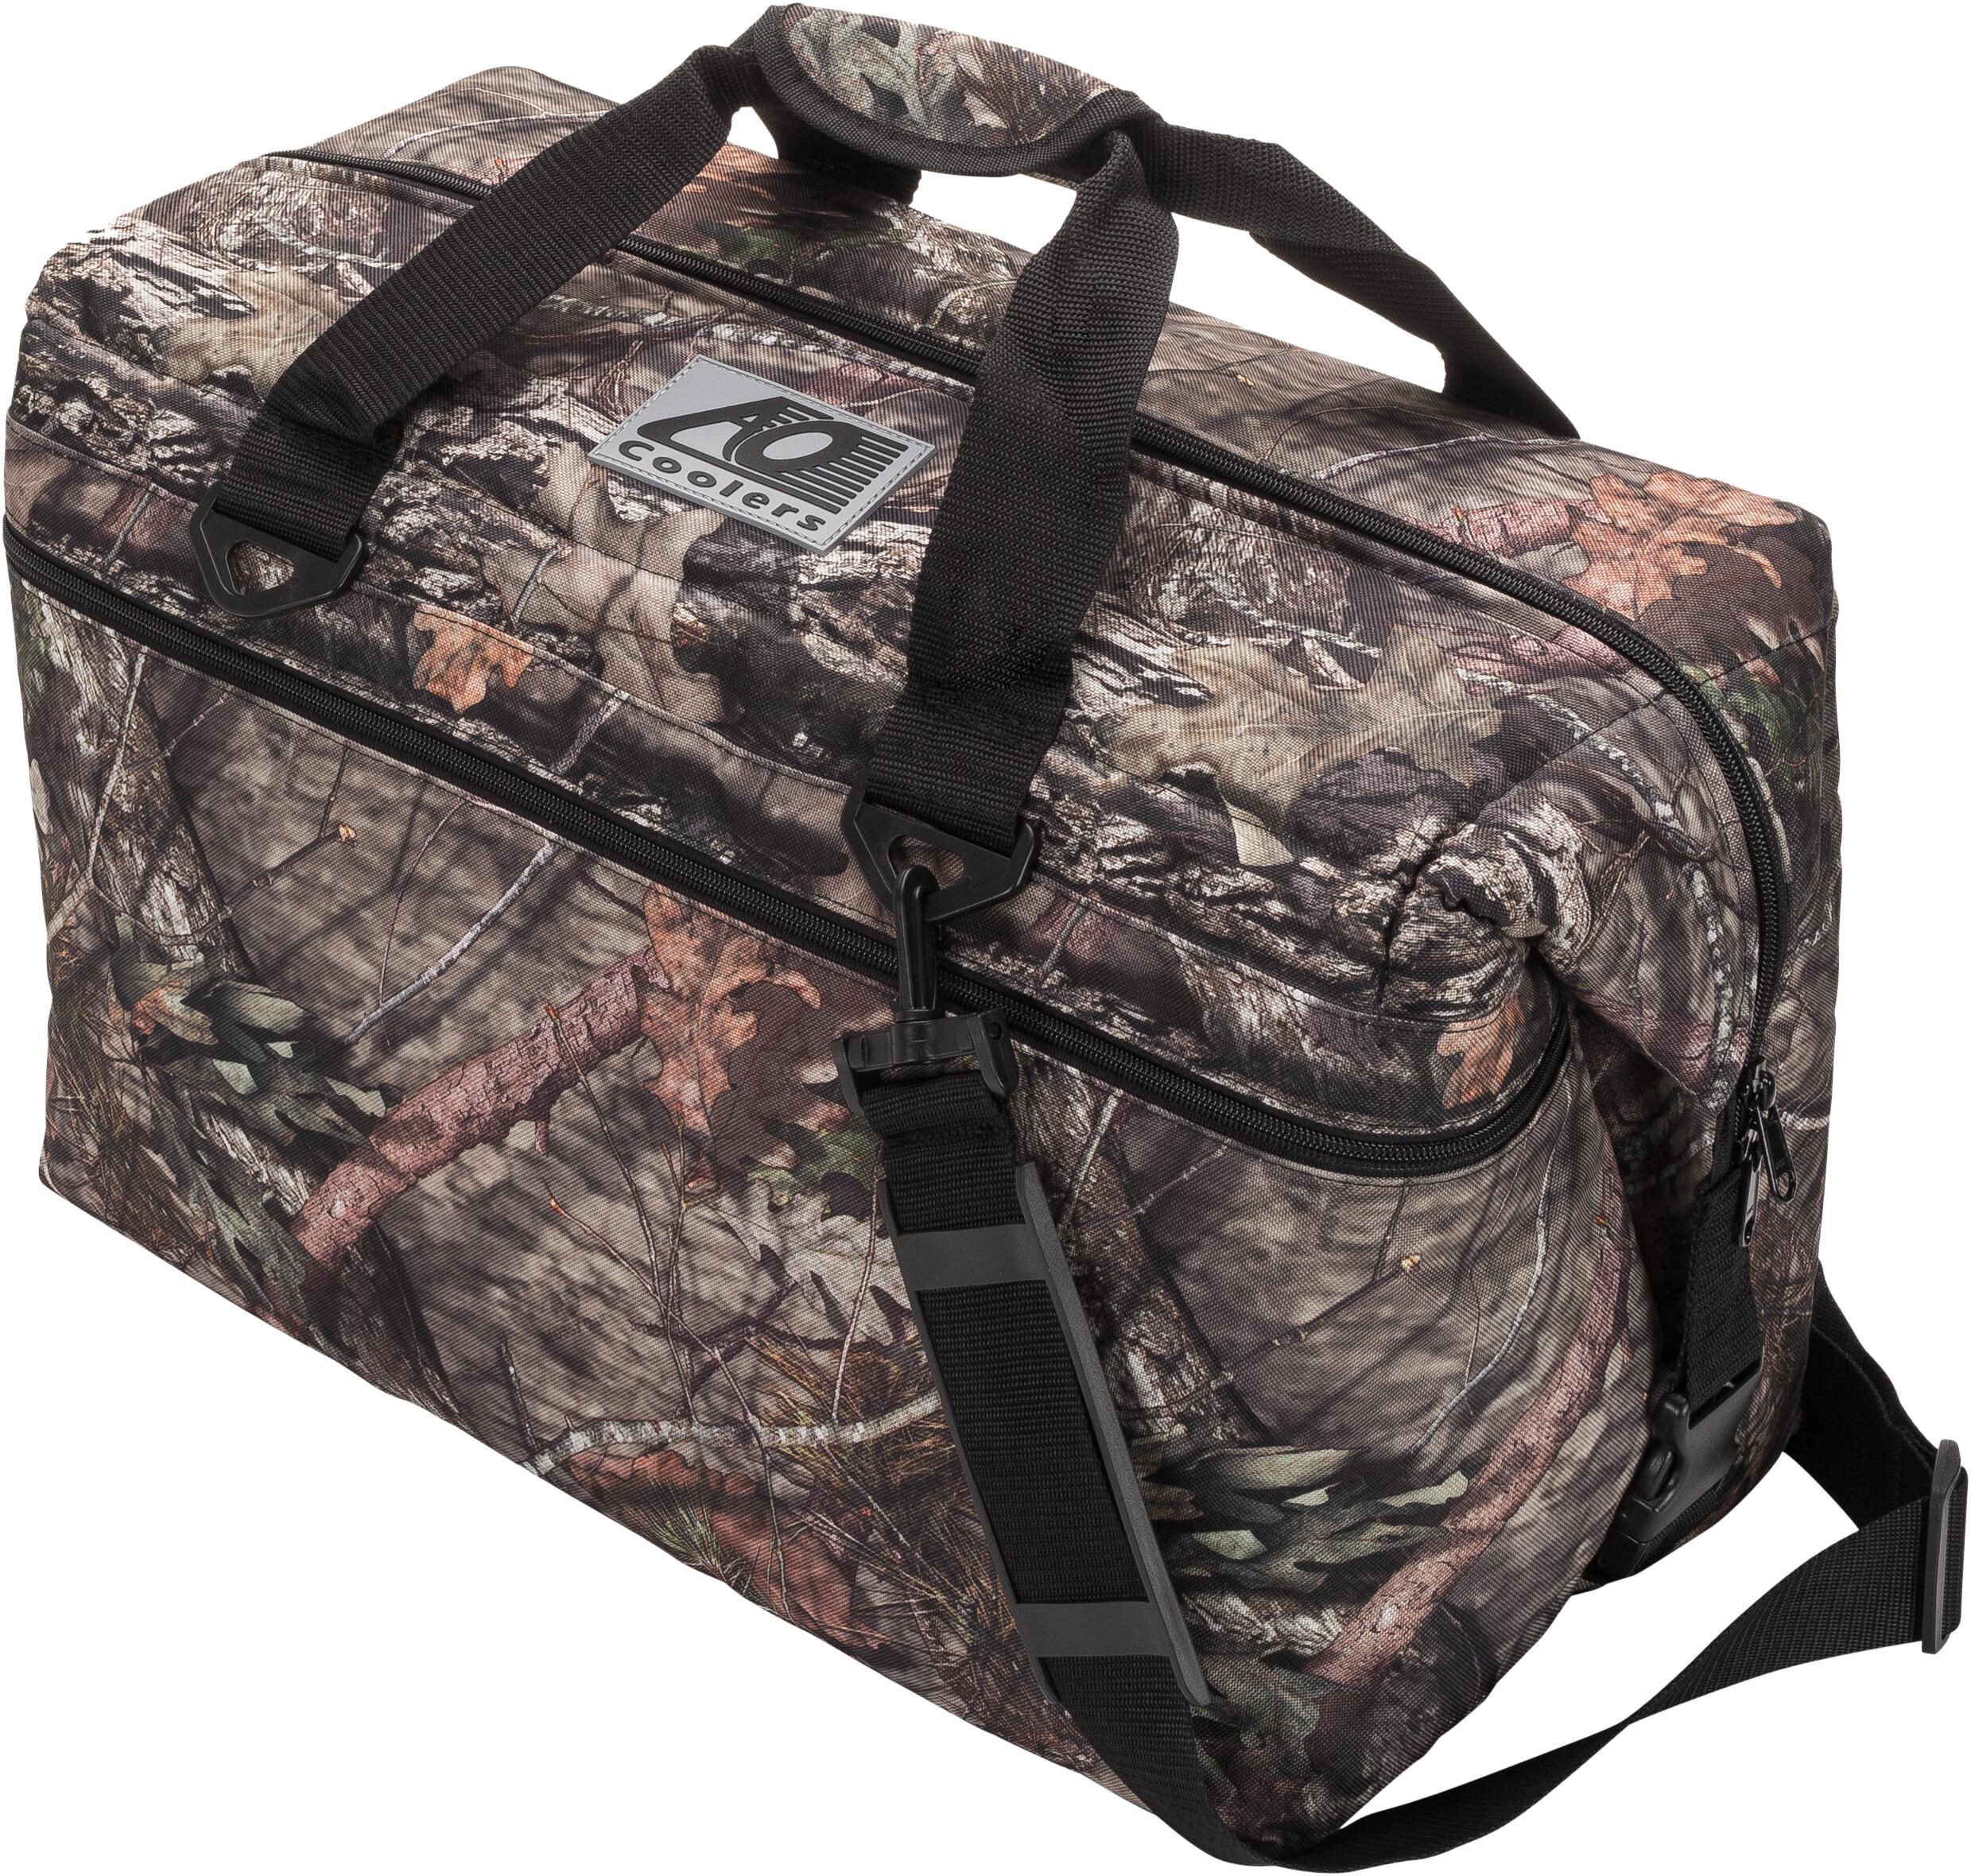 AO Coolers Original Soft Cooler with High-Density Insulation, Mossy Oak, 48- Can Walmart Canada